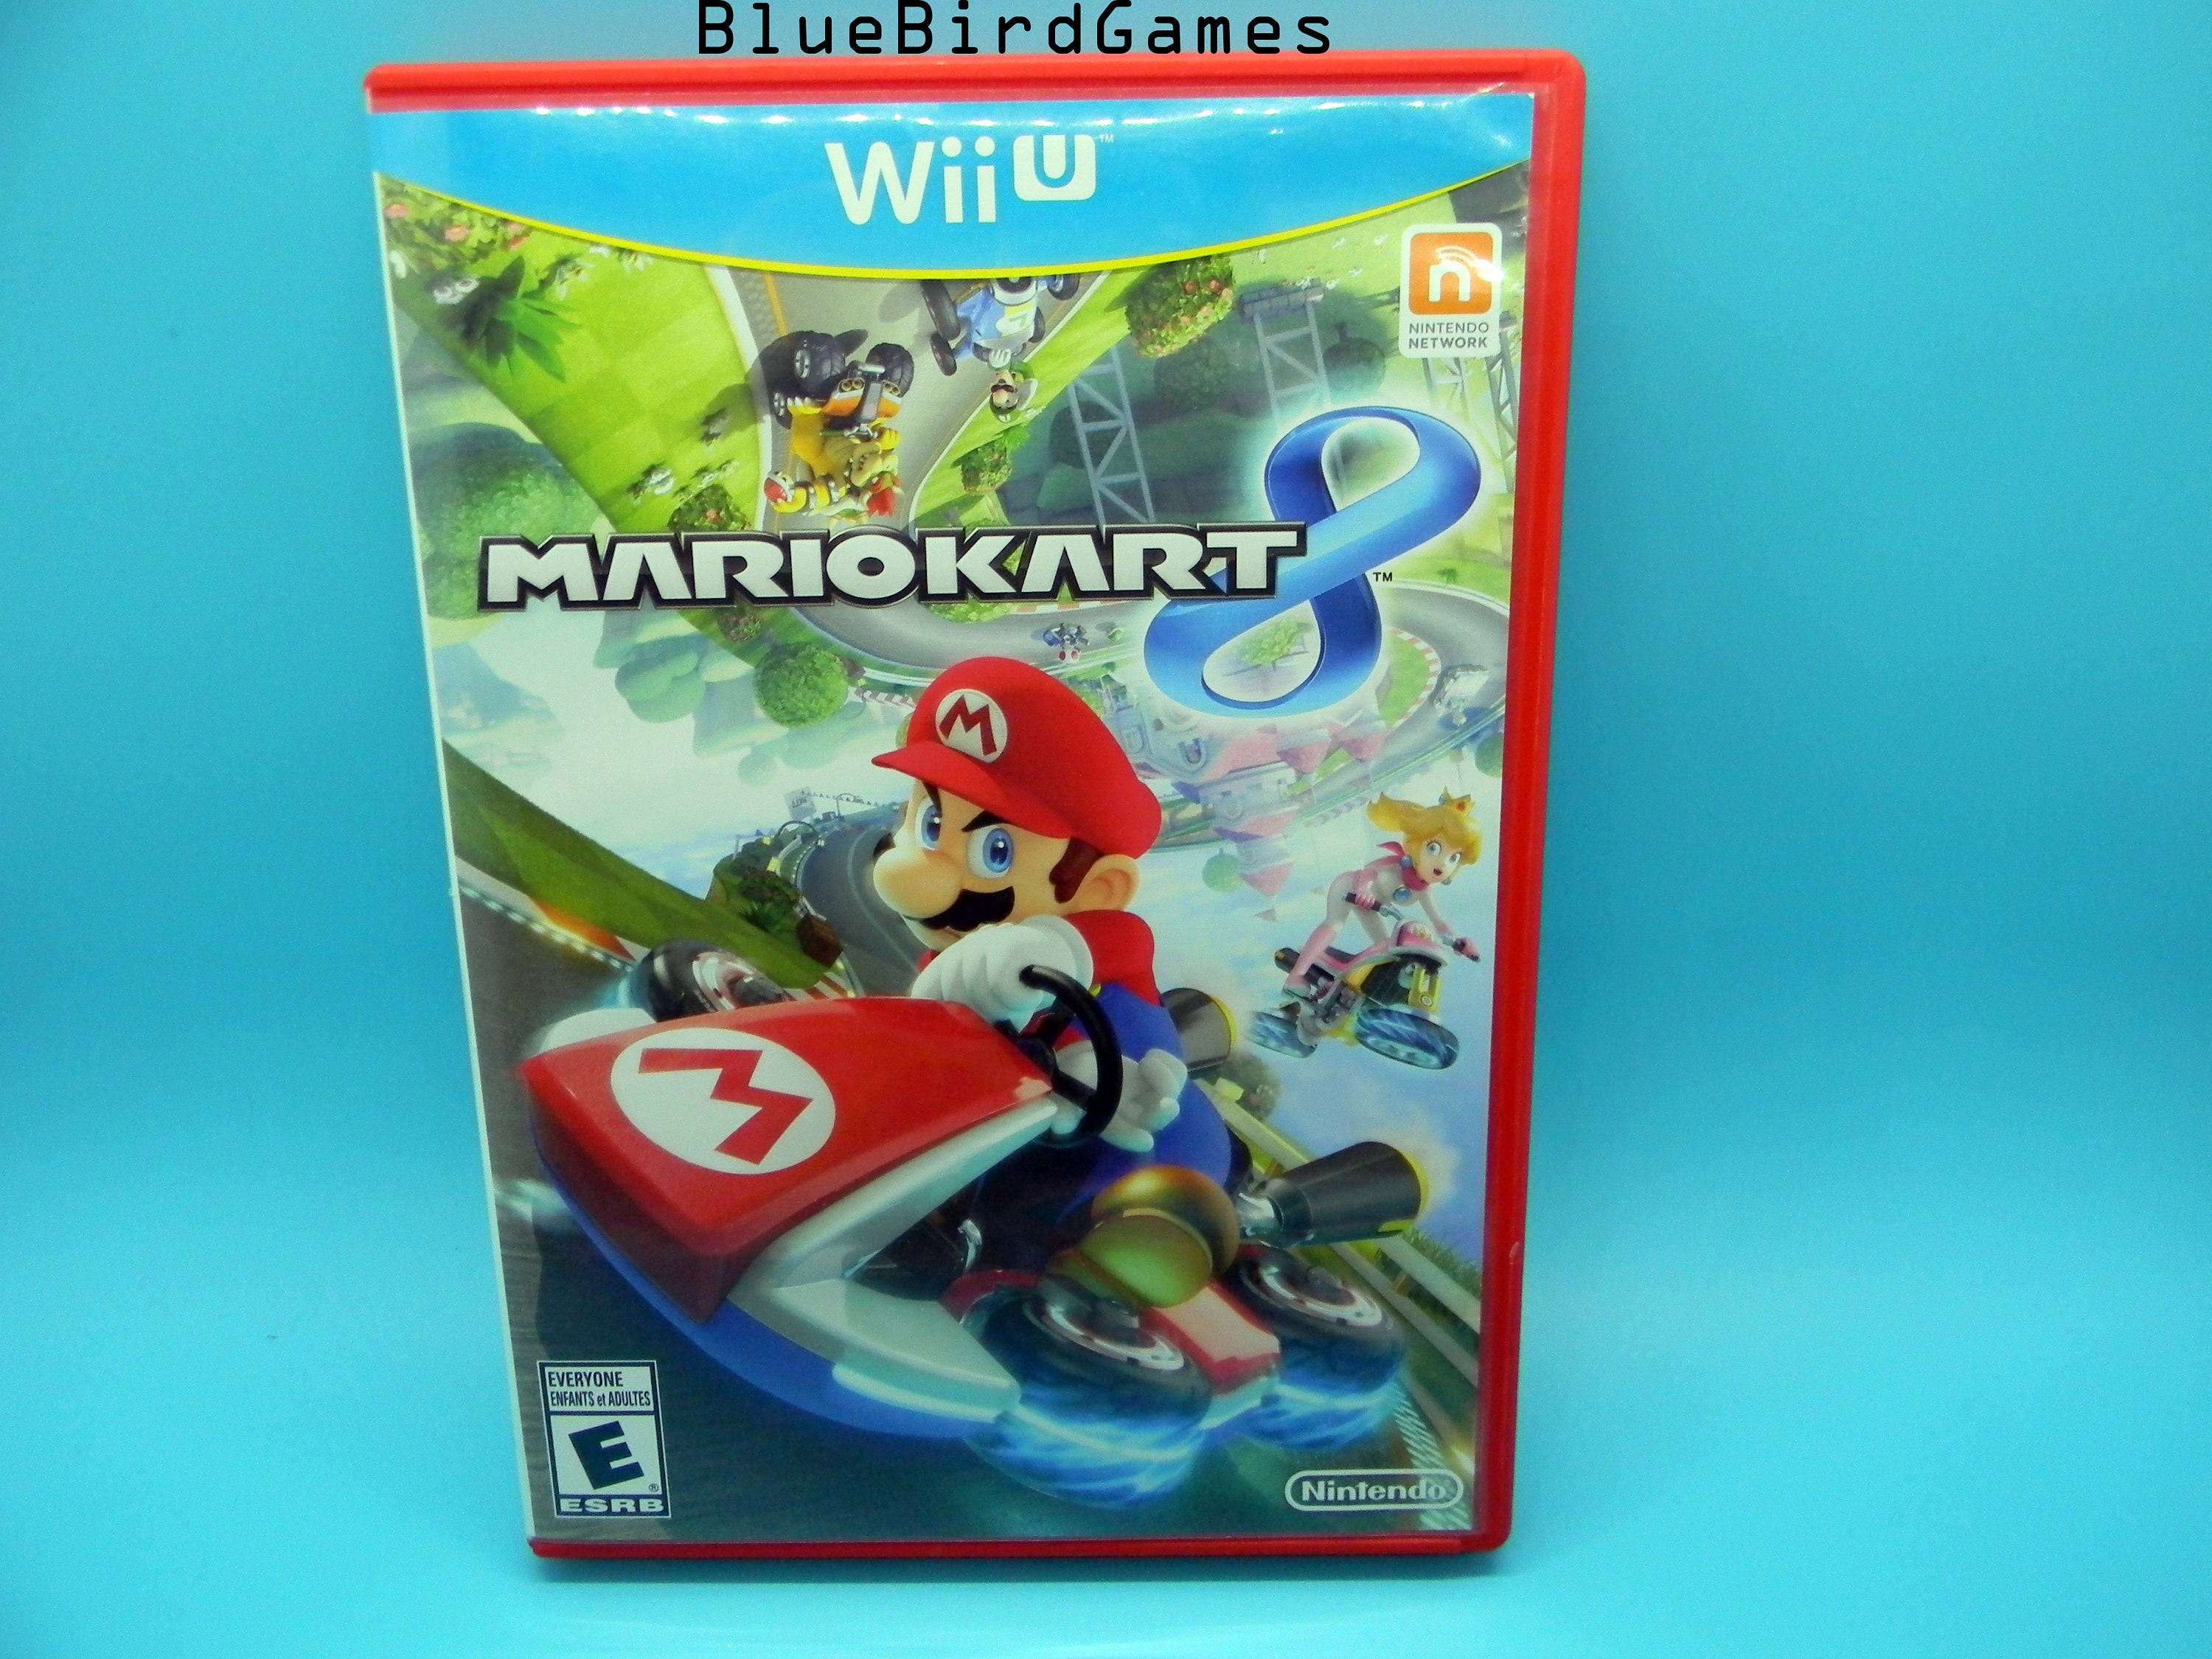 Mario Kart 8 Nintendo Wii U Game Complete With Manual Tested Free Ship